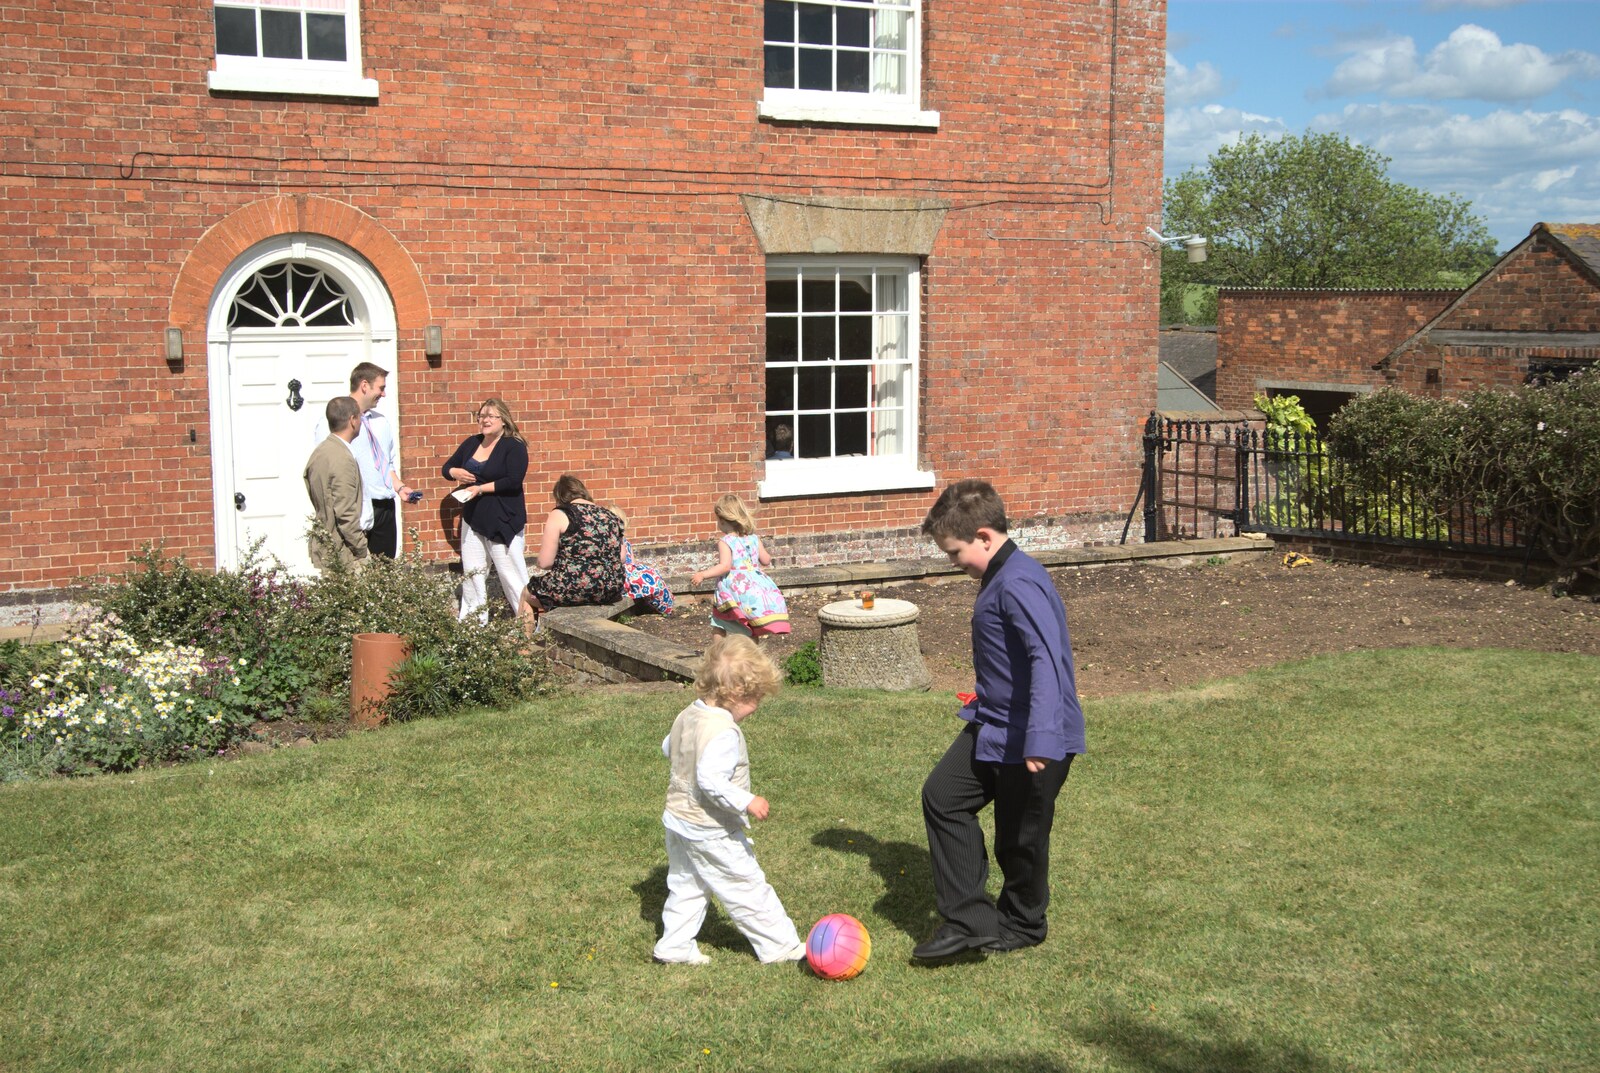 Fred plays a spot of footie from A Christening, Wilford, Northamptonshire - 22nd May 2011